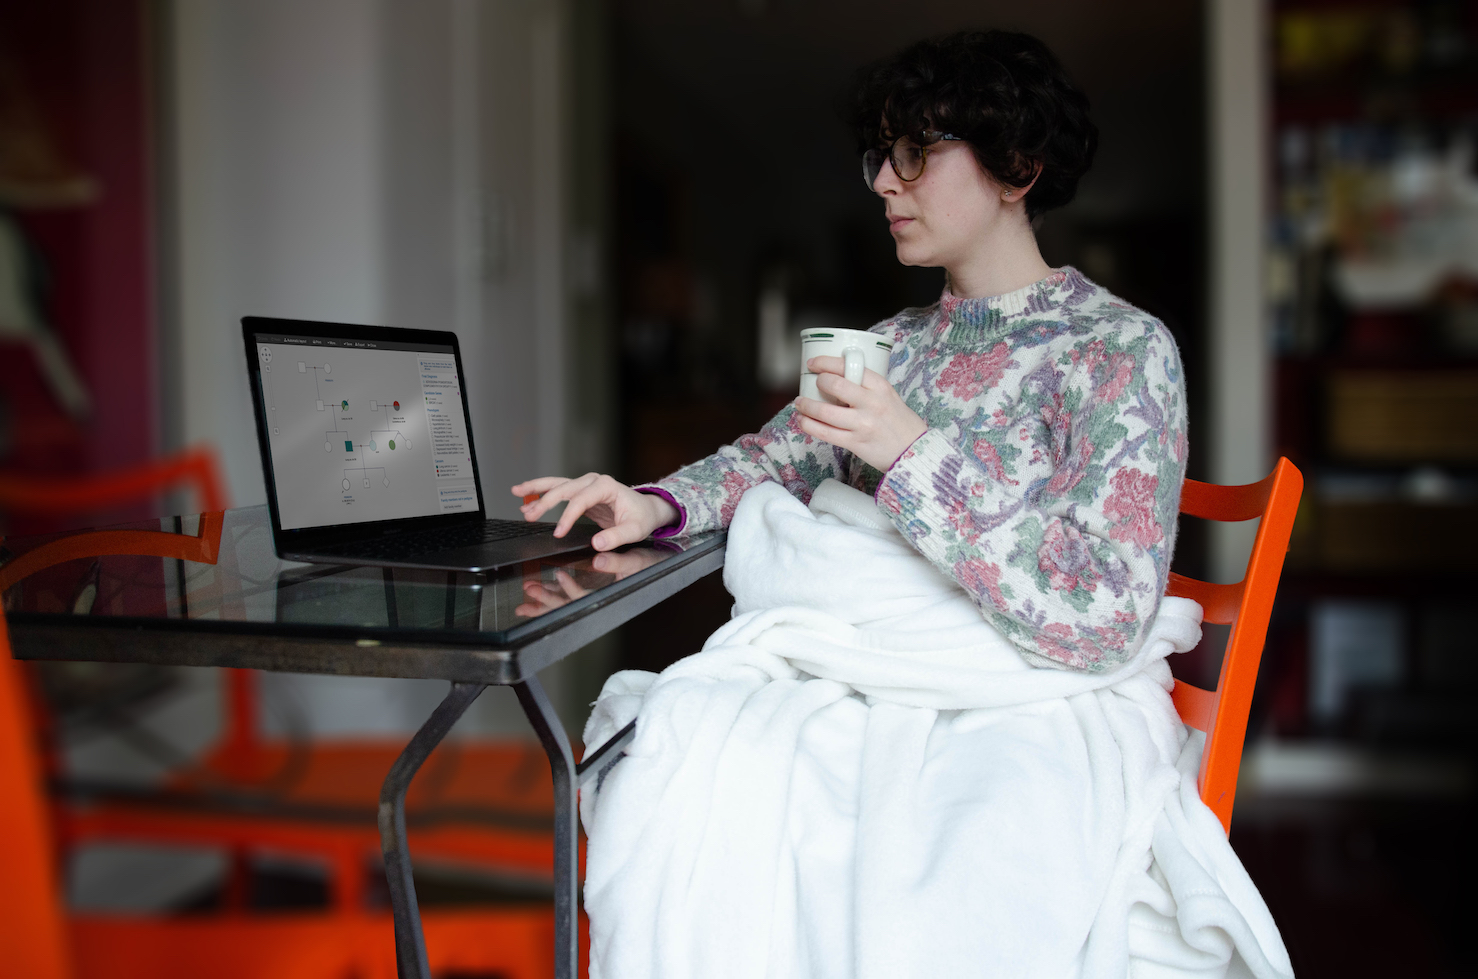 A woman is working on her laptop in her kitchen table with a mug in hand and a blanket over her legs. On the laptop screen, a pedigree is visible, and one hand rests on the mouse keyboard mid-action while drawing the pedigree.